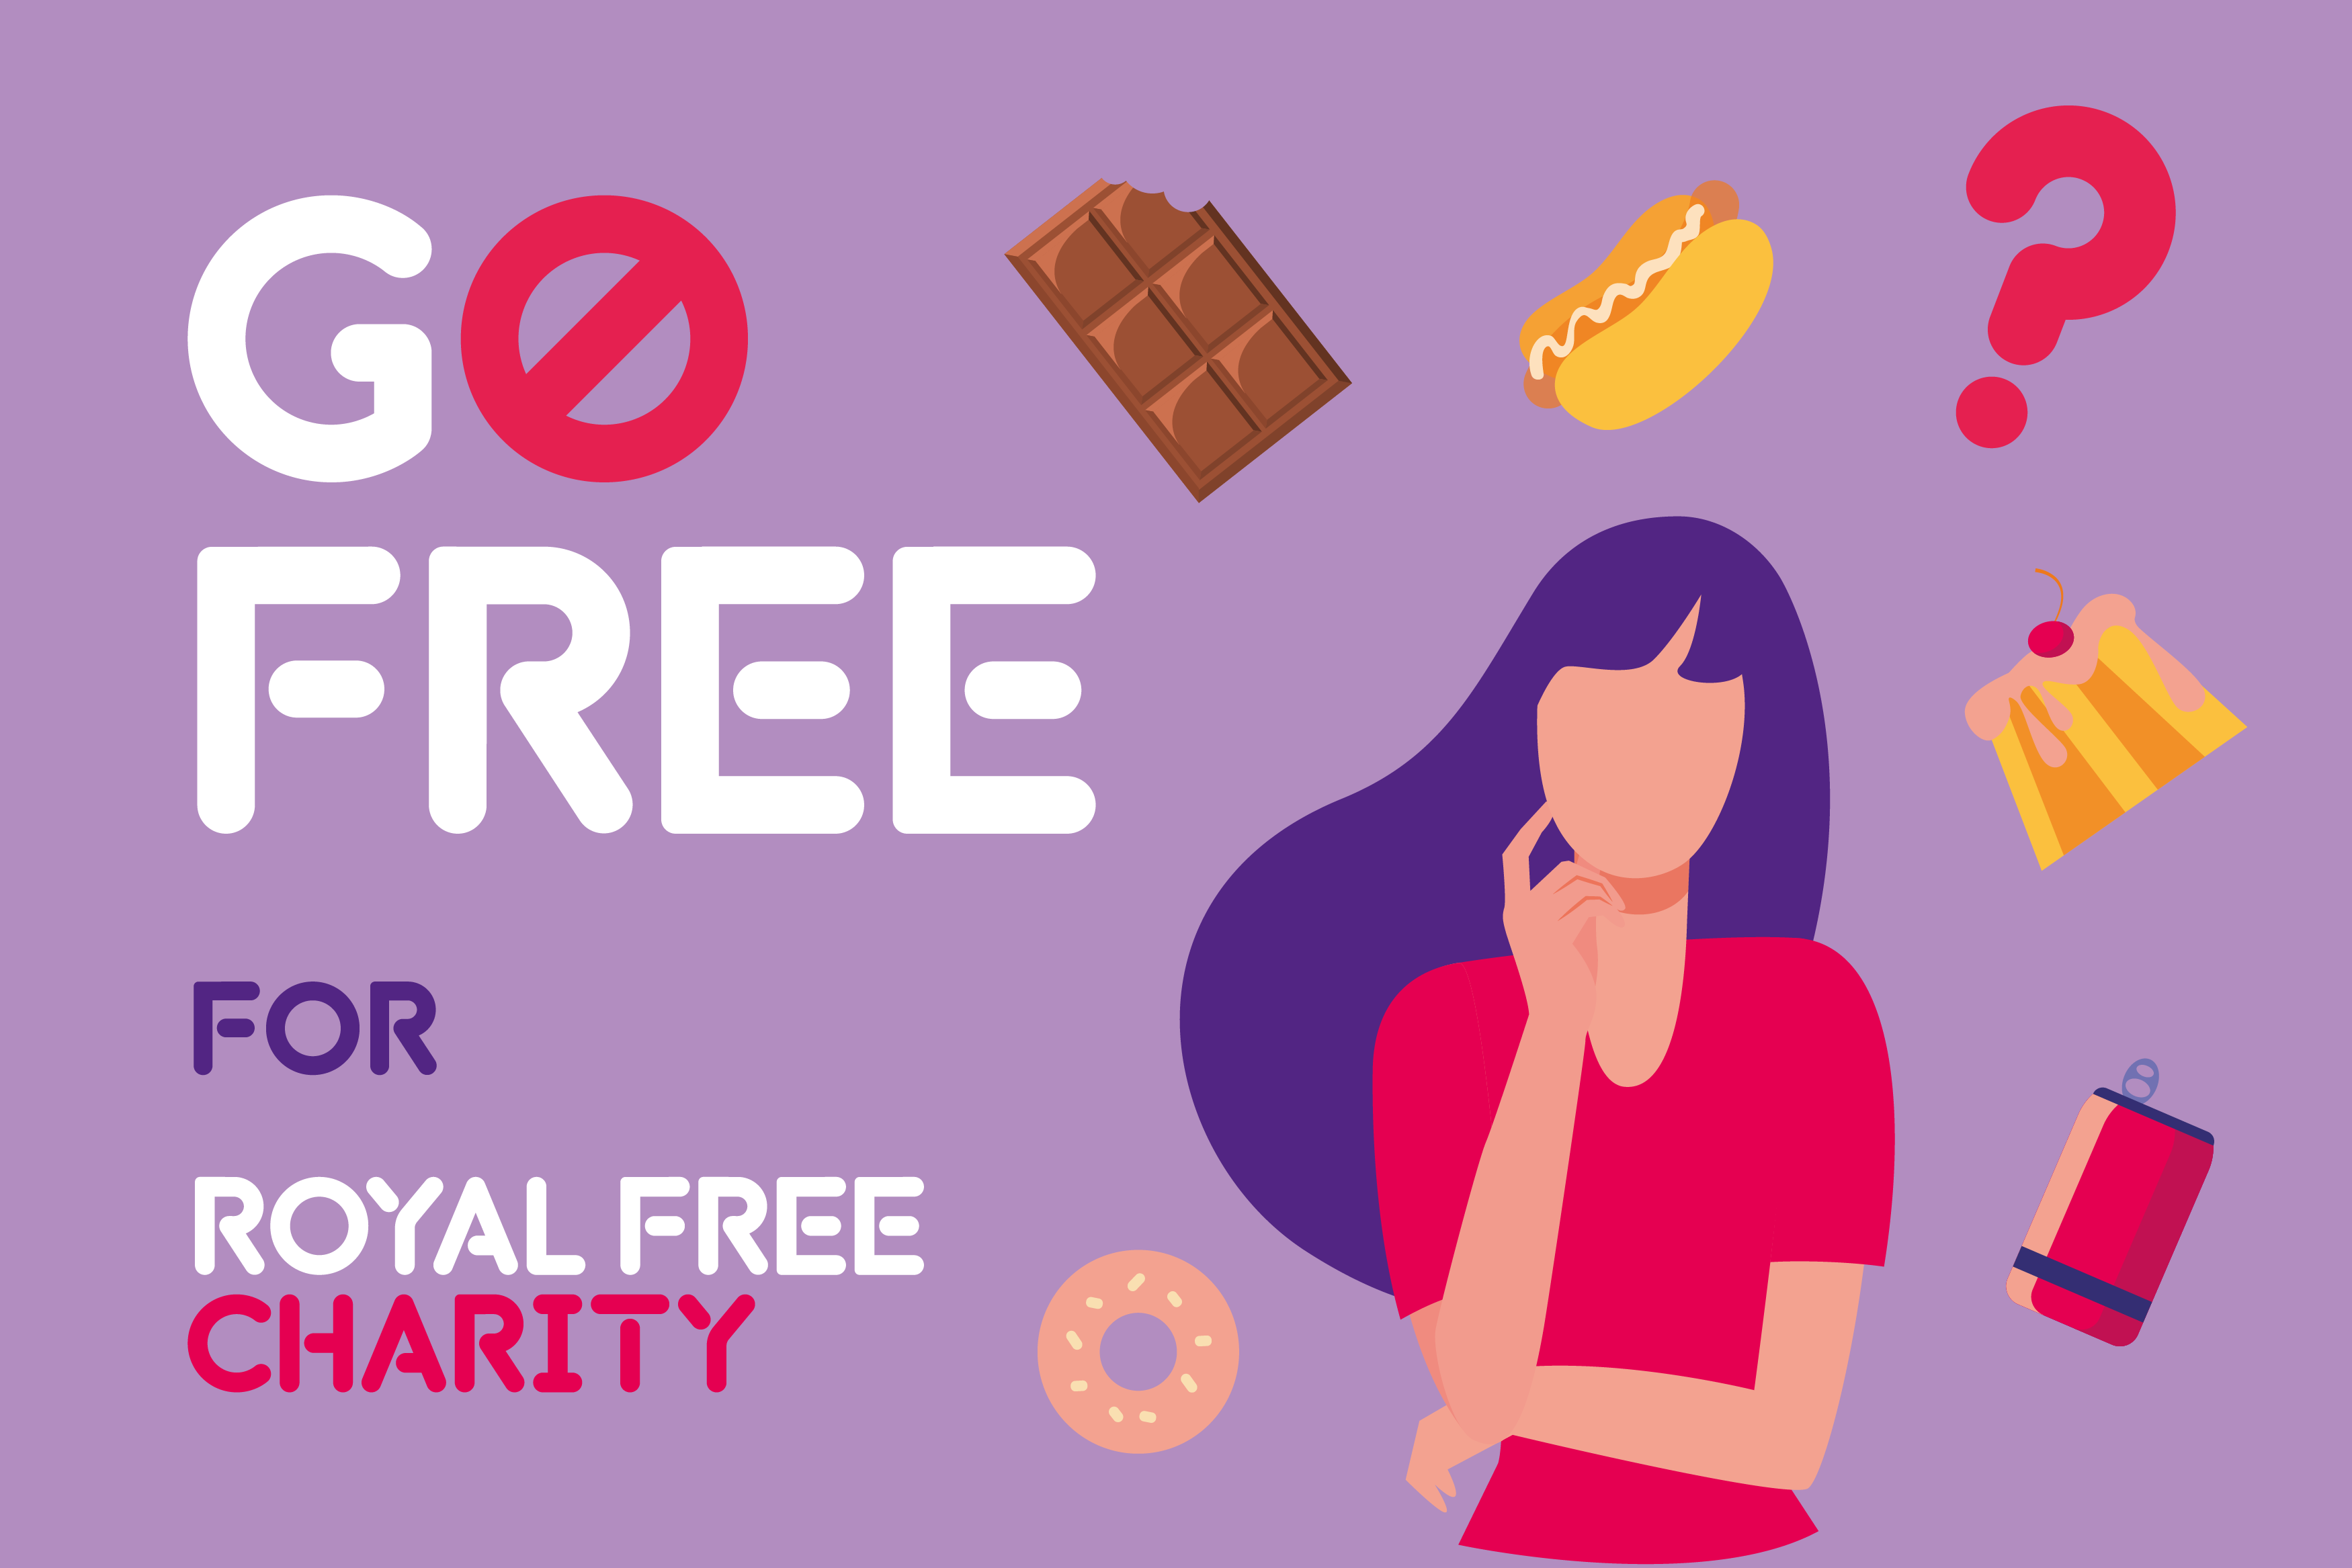 Go Free for Royal Free Charity